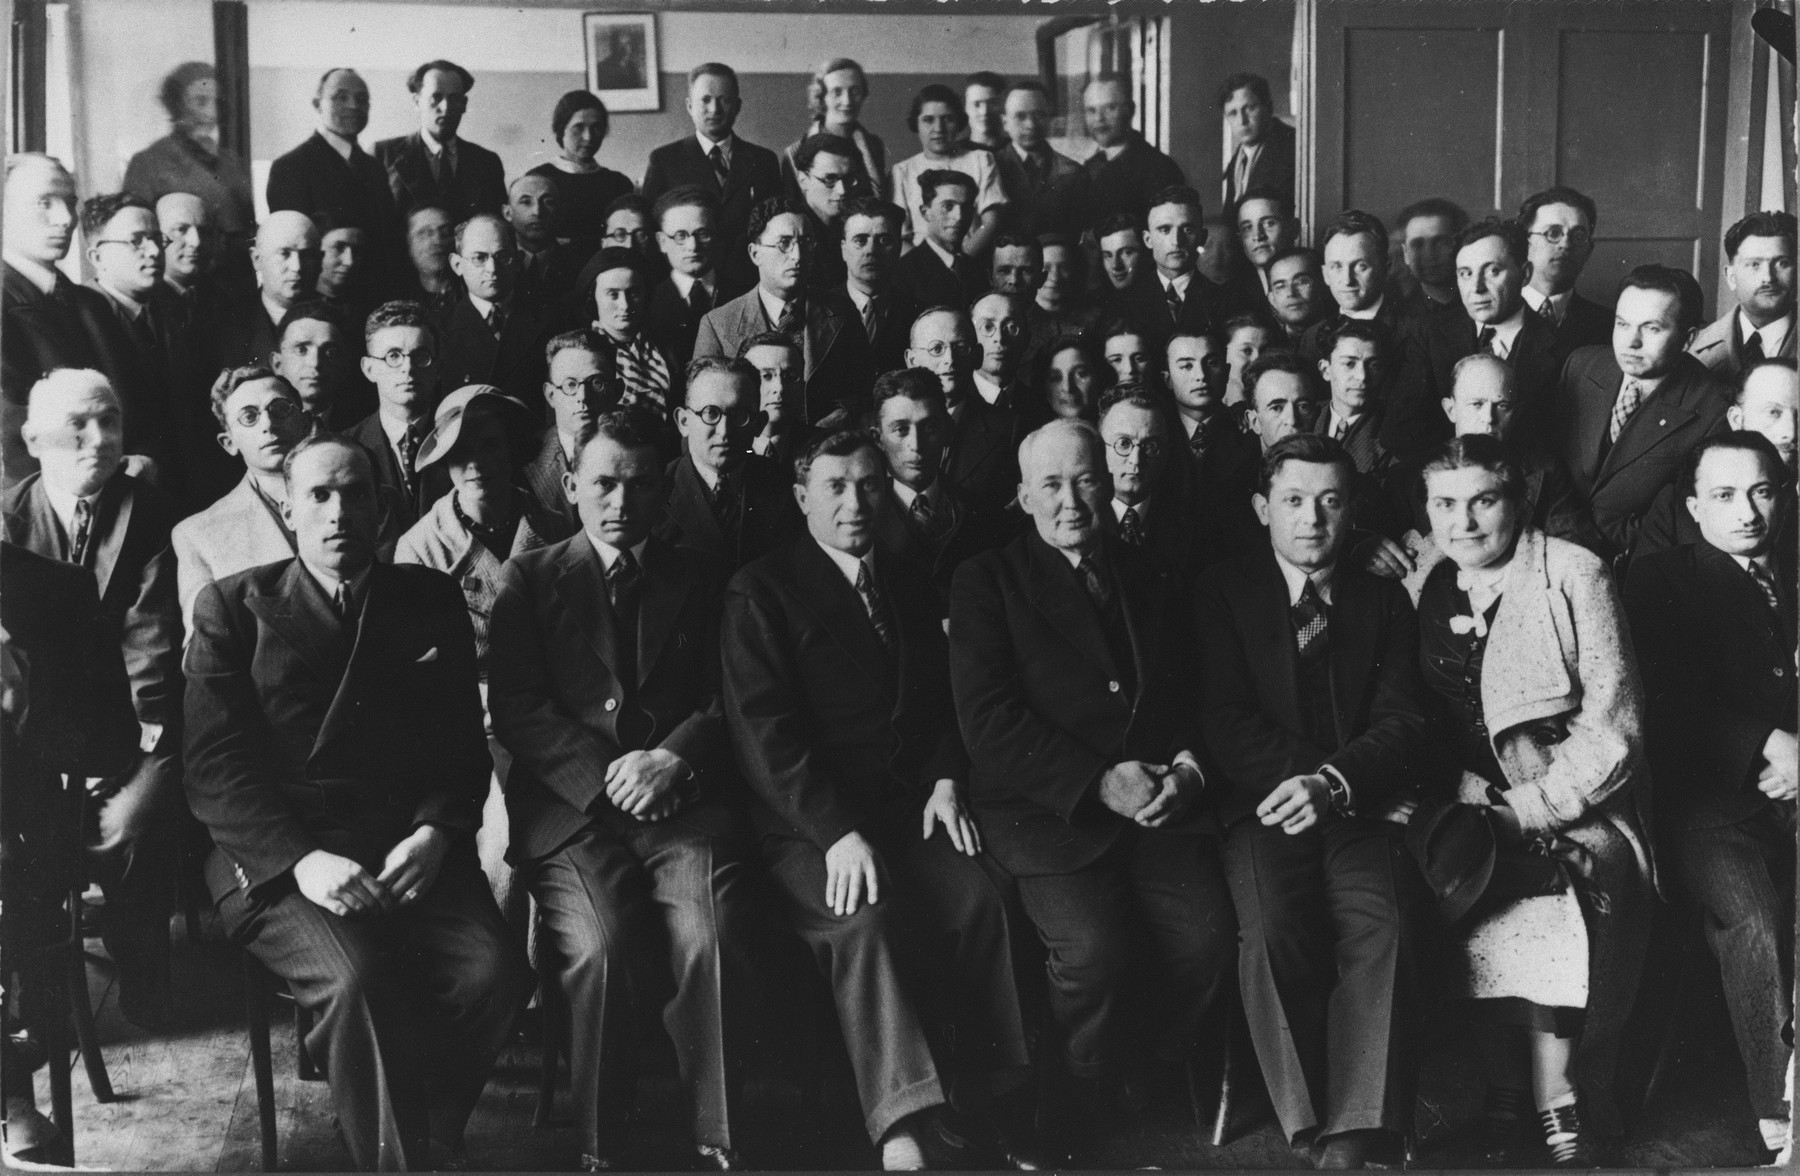 Group portrait of Jewish Tarbut school teachers at a national convention.  

Among those pictured is Ralph Denishevsky (front row, left).